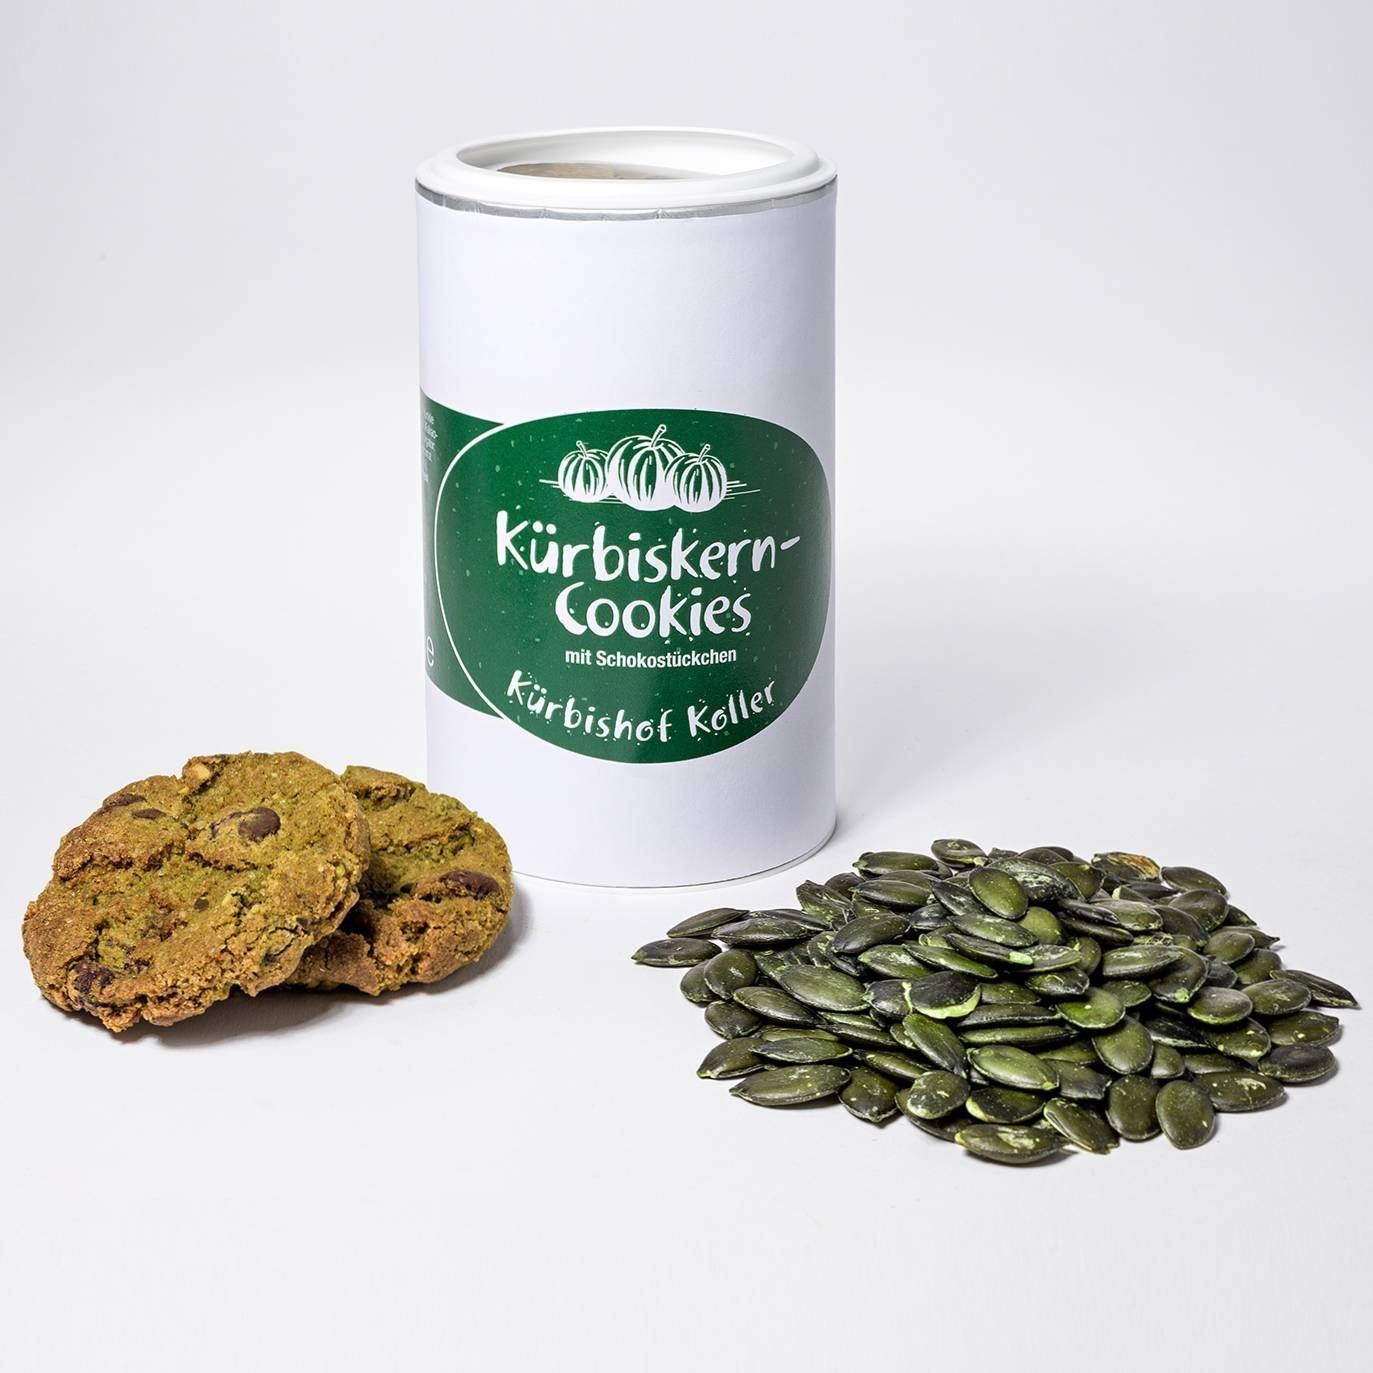 Pumpkin Seed Cookies with Chocolate Chips in Slovakia